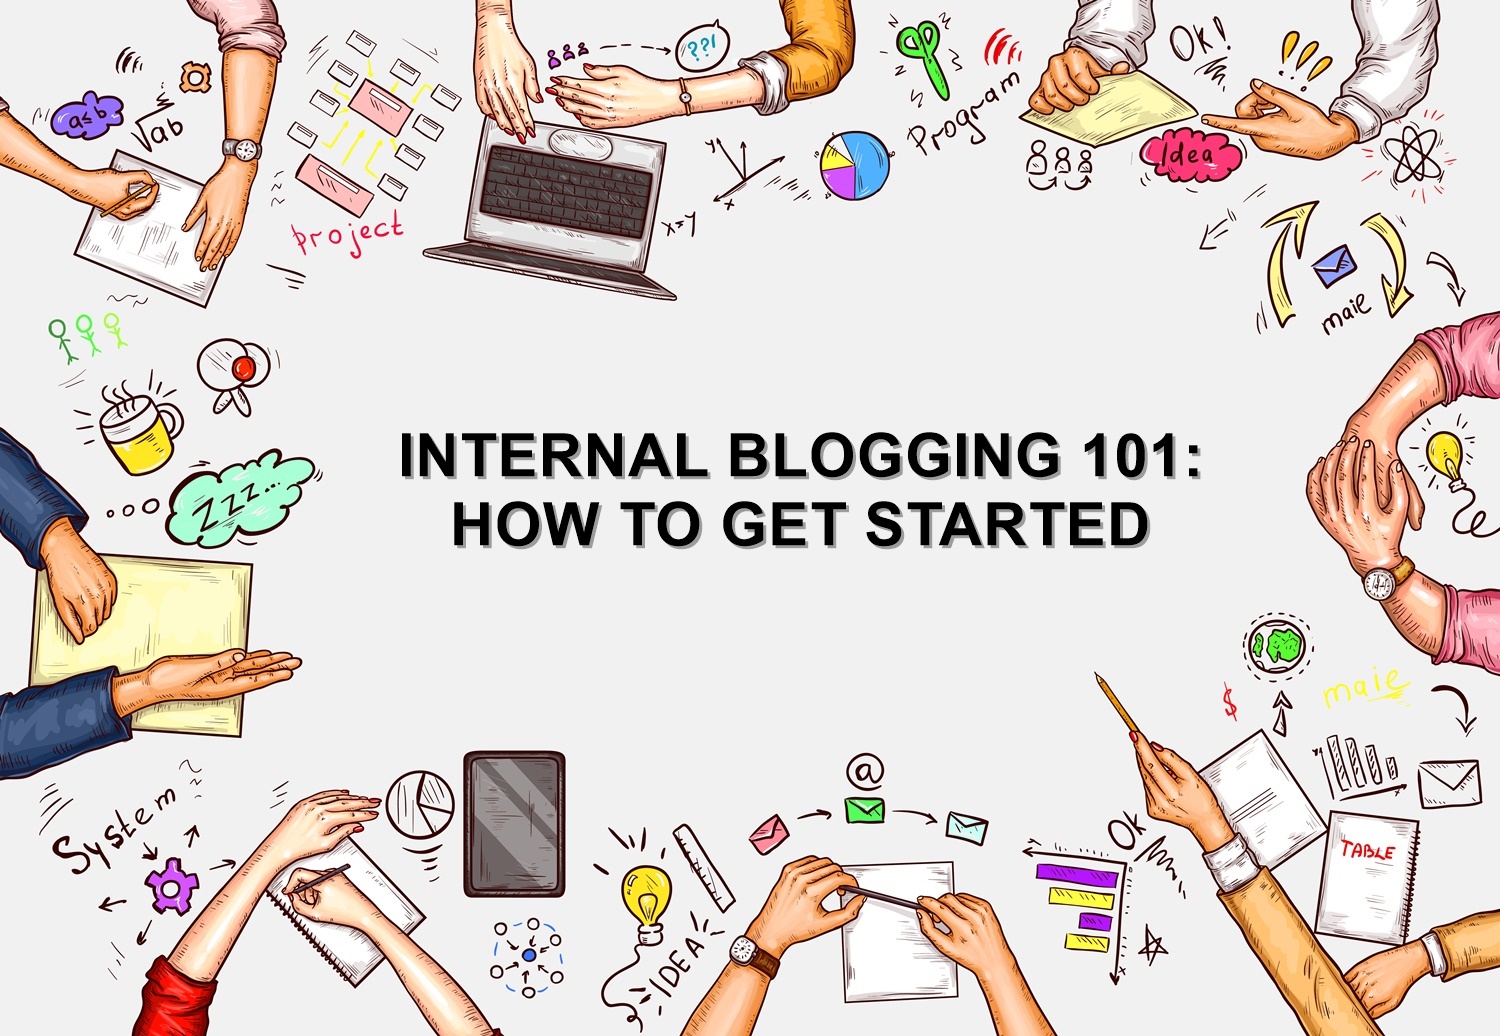 Internal Blogging 101: How to Get Started